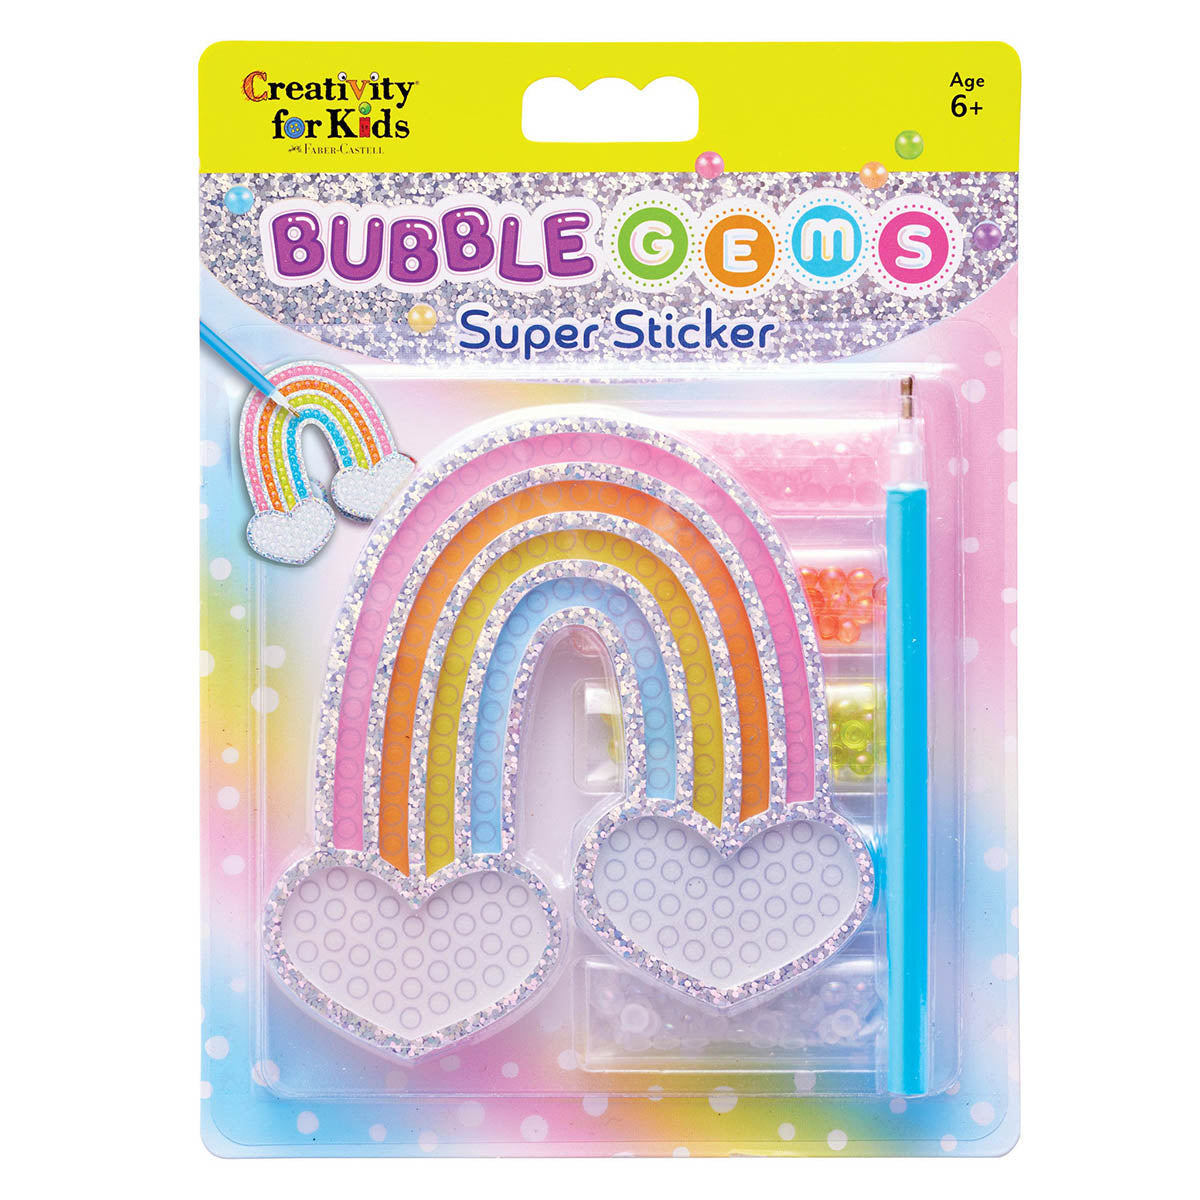 Front side of package for Rainbow Bubble Gems Super Sticker by Creativity for Kids.